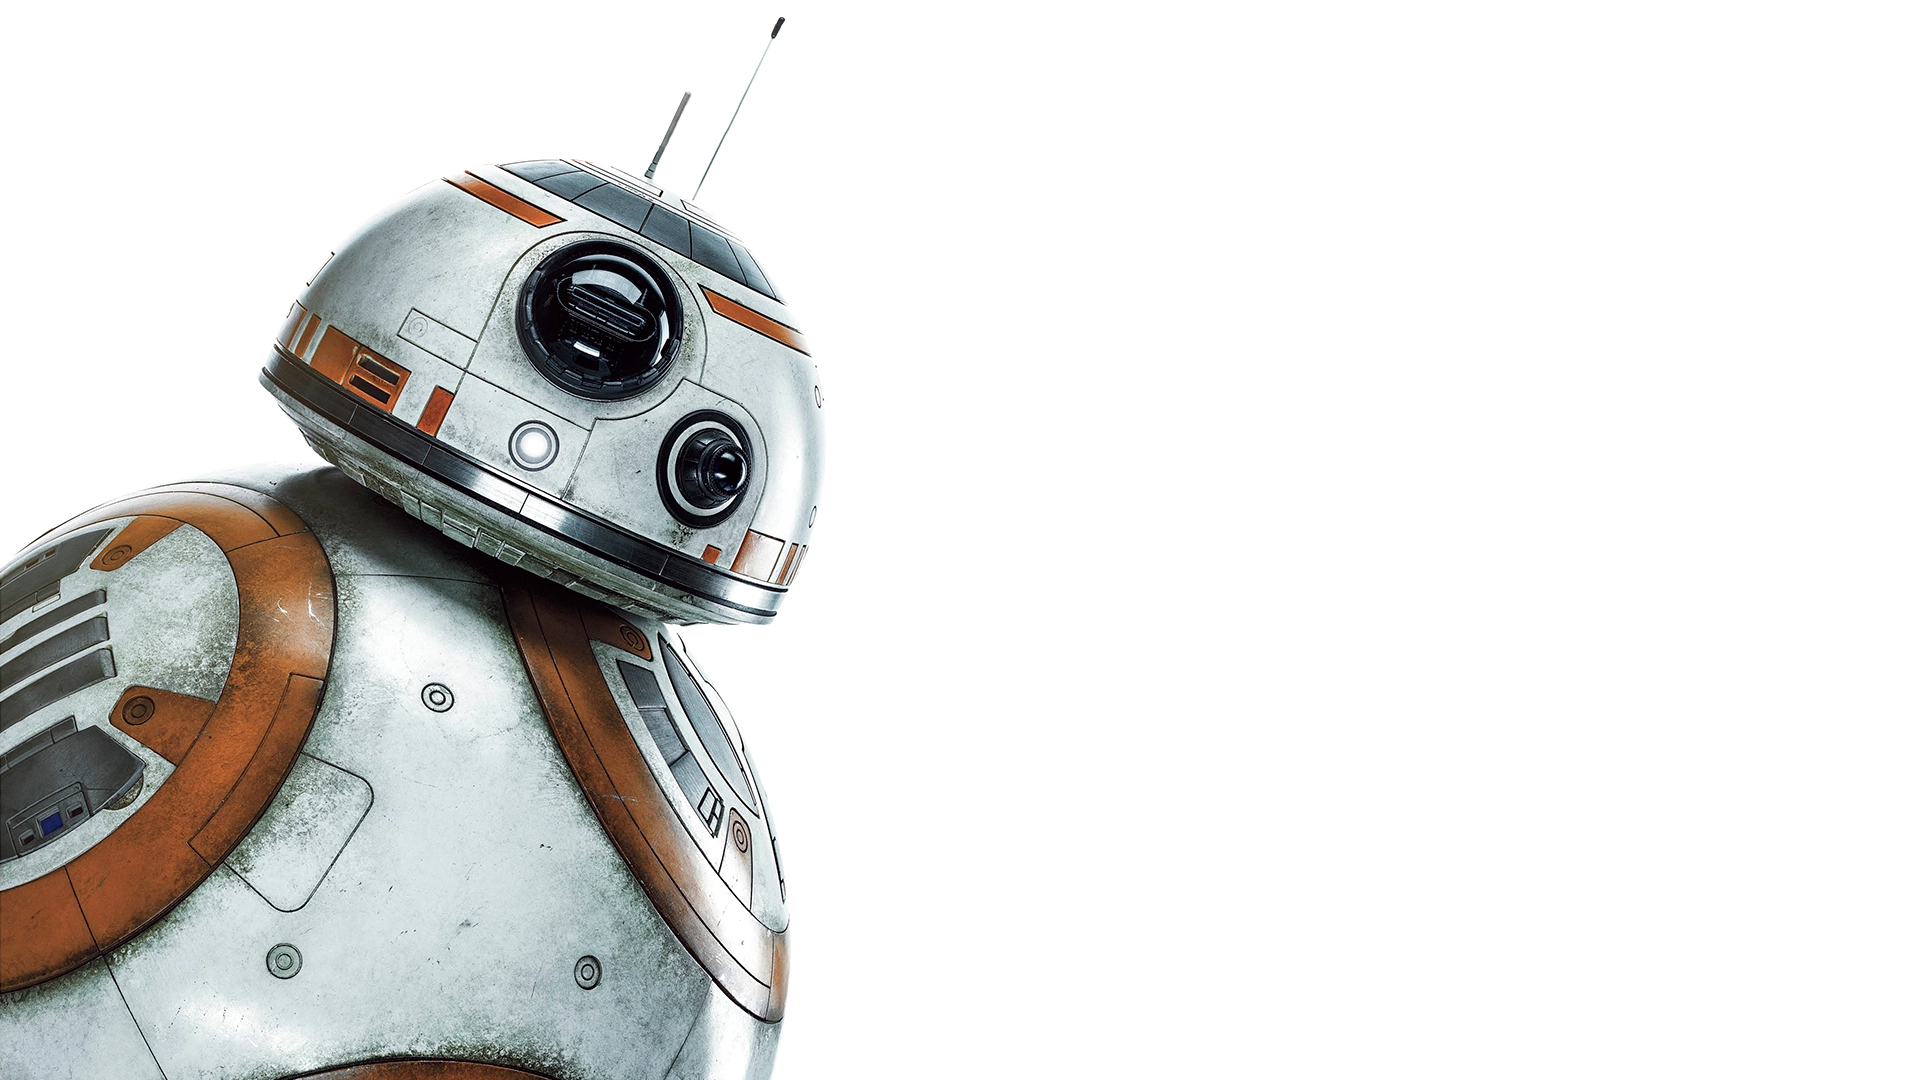 bb8 wallpaper,product,small appliance